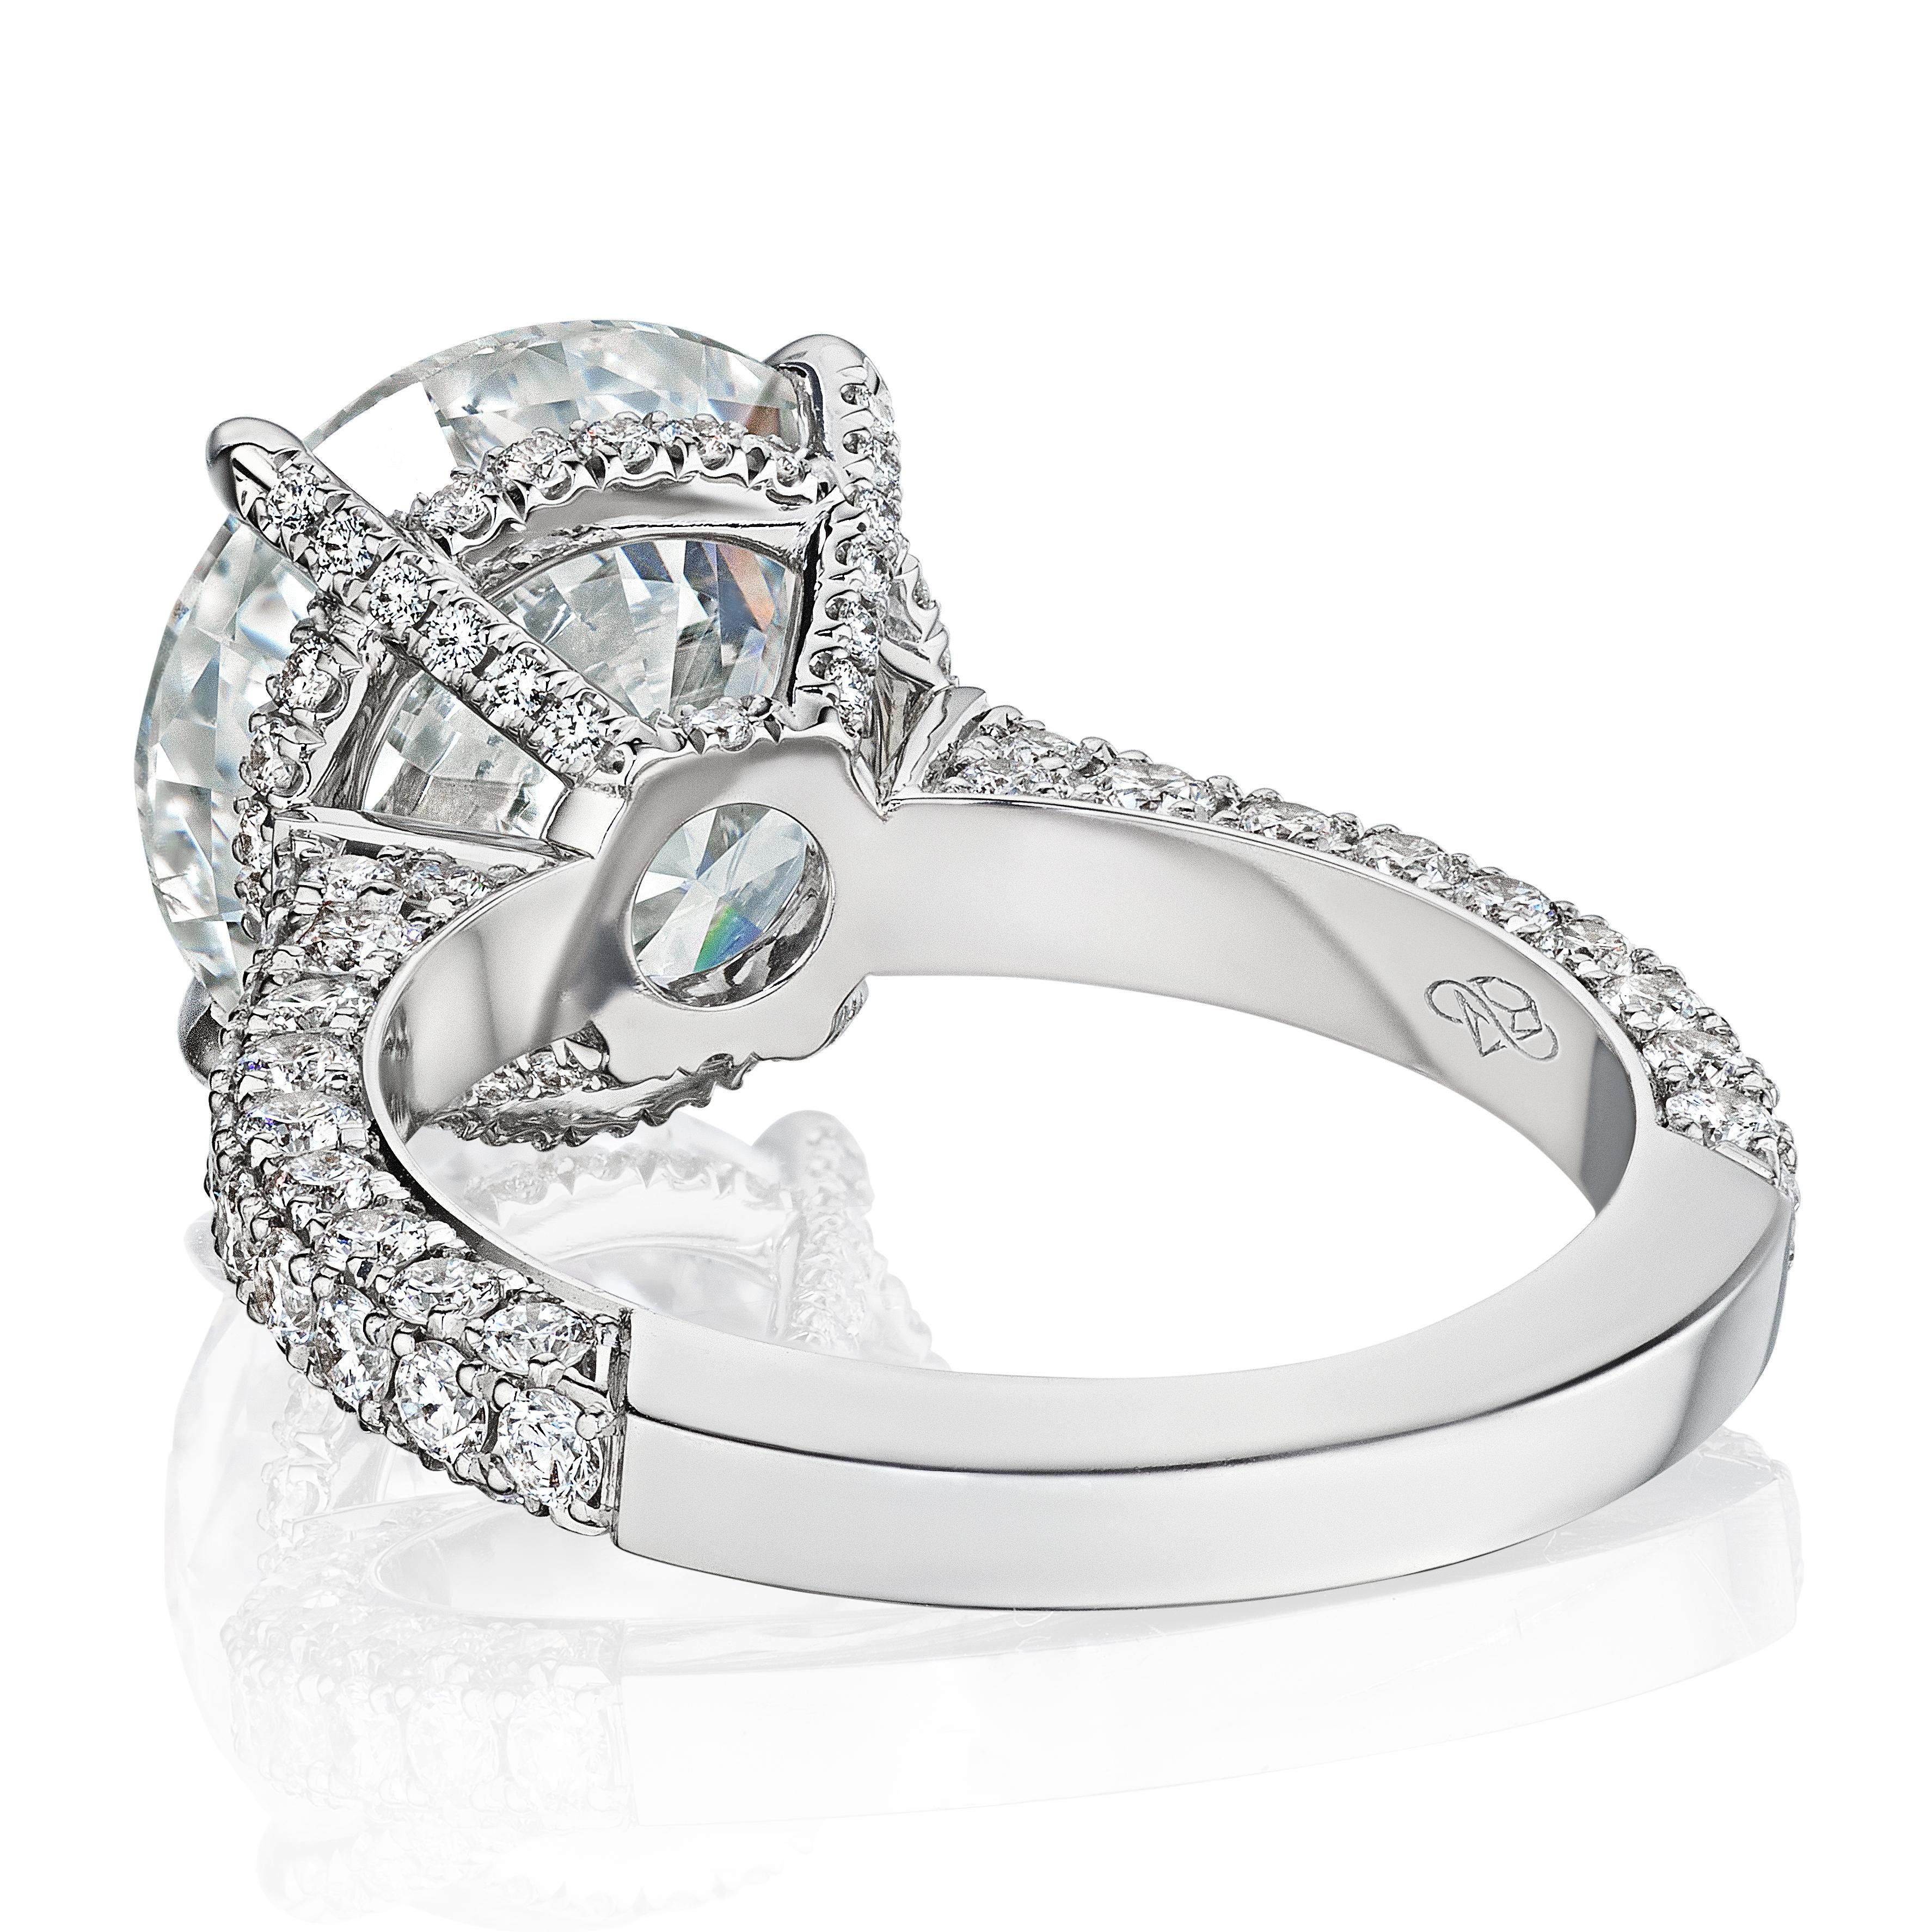 For Sale:  GIA Certified 5.00 Carat D VS2 GIA Round Diamond Engagement Ring 